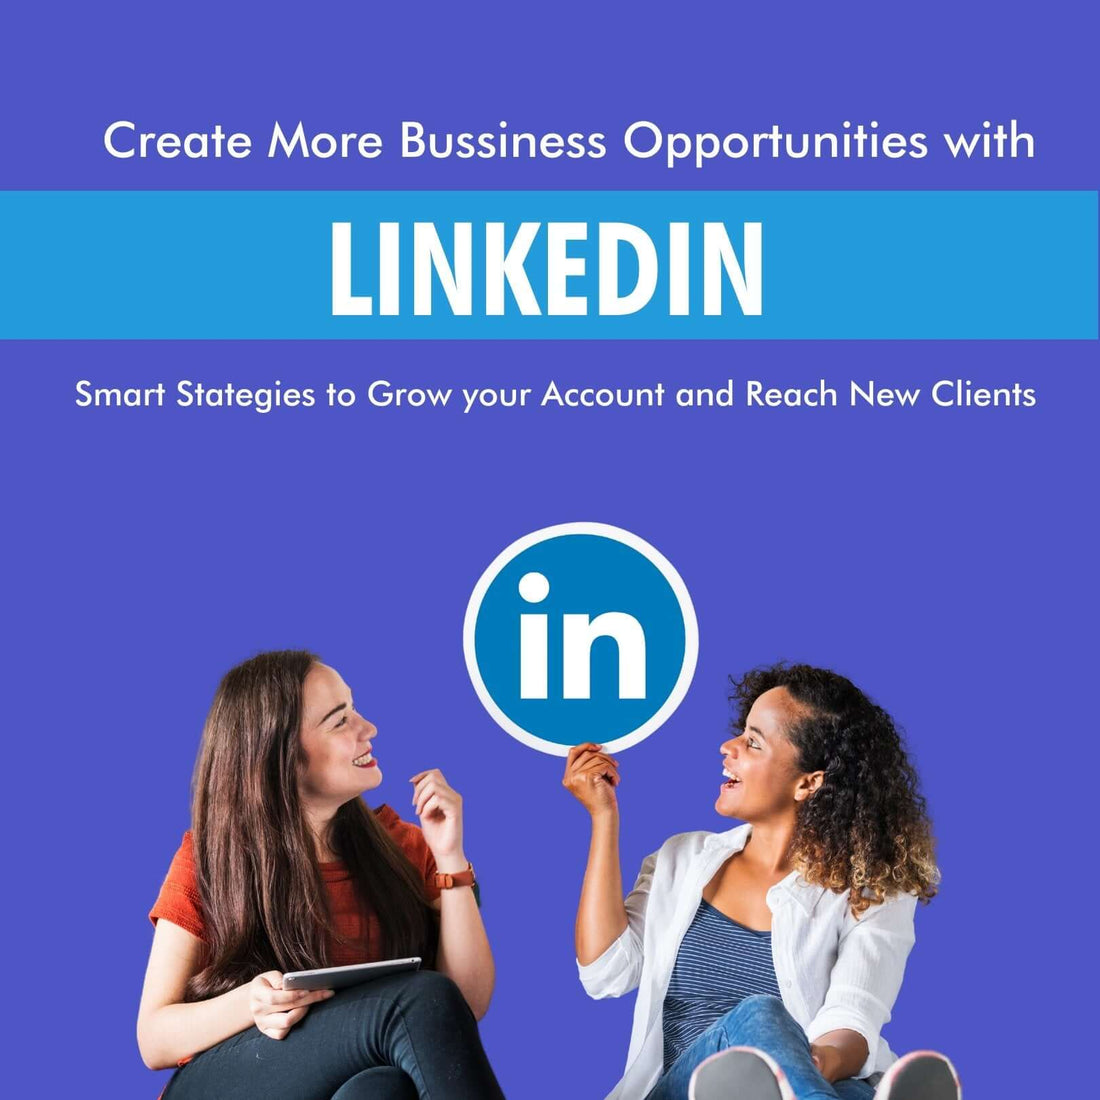 Create More Business Opportunities with LinkedIn: Smart Strategies to Grow Your Linked In Account